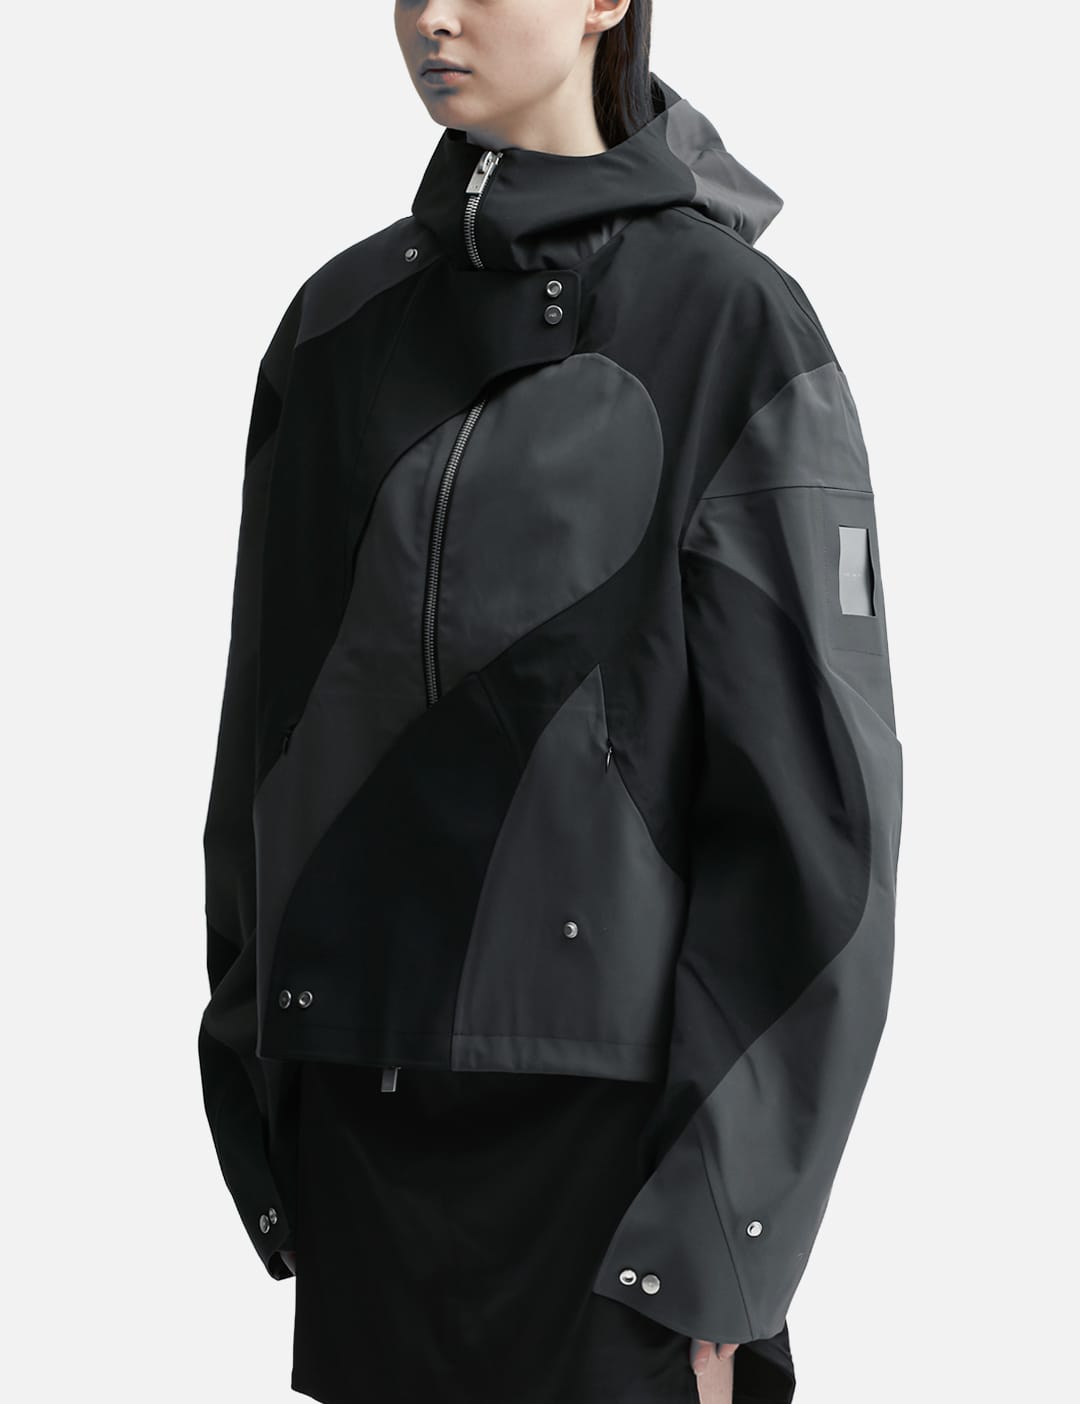 Heliot Emil - Trident Technical Jacket | HBX - Globally Curated